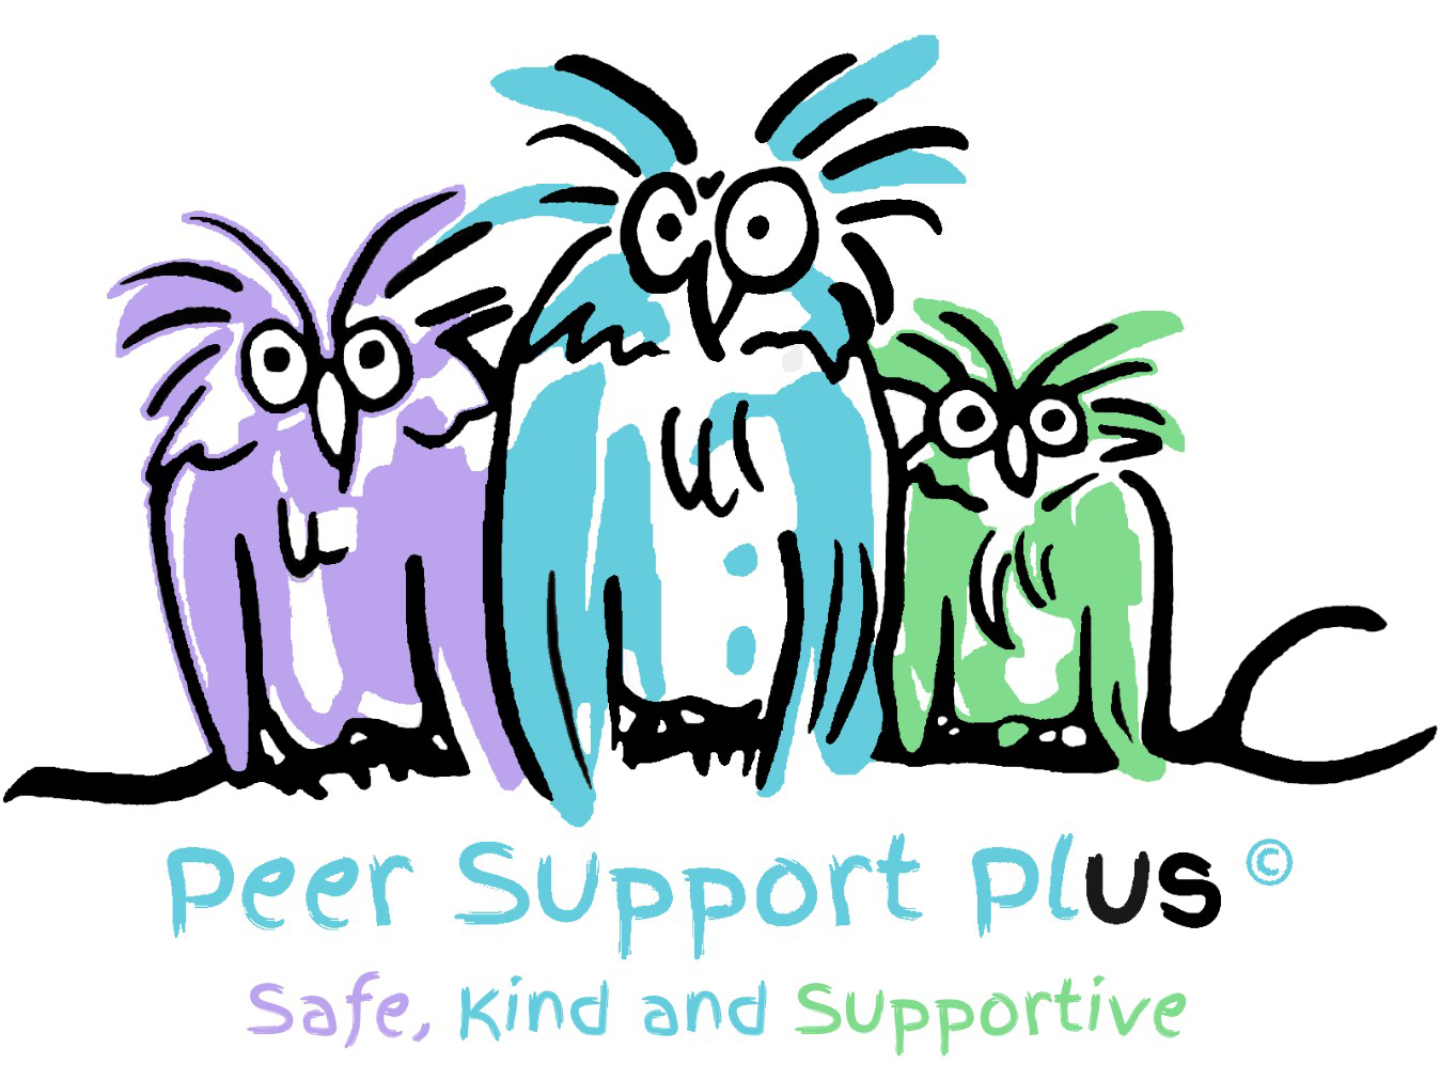 Peer Support Plus logo featuring 3 owls, purple on te left, a blue owl in the middle and a green owl on the right. It features the charity name underneath and the words safe, kind and supportive.